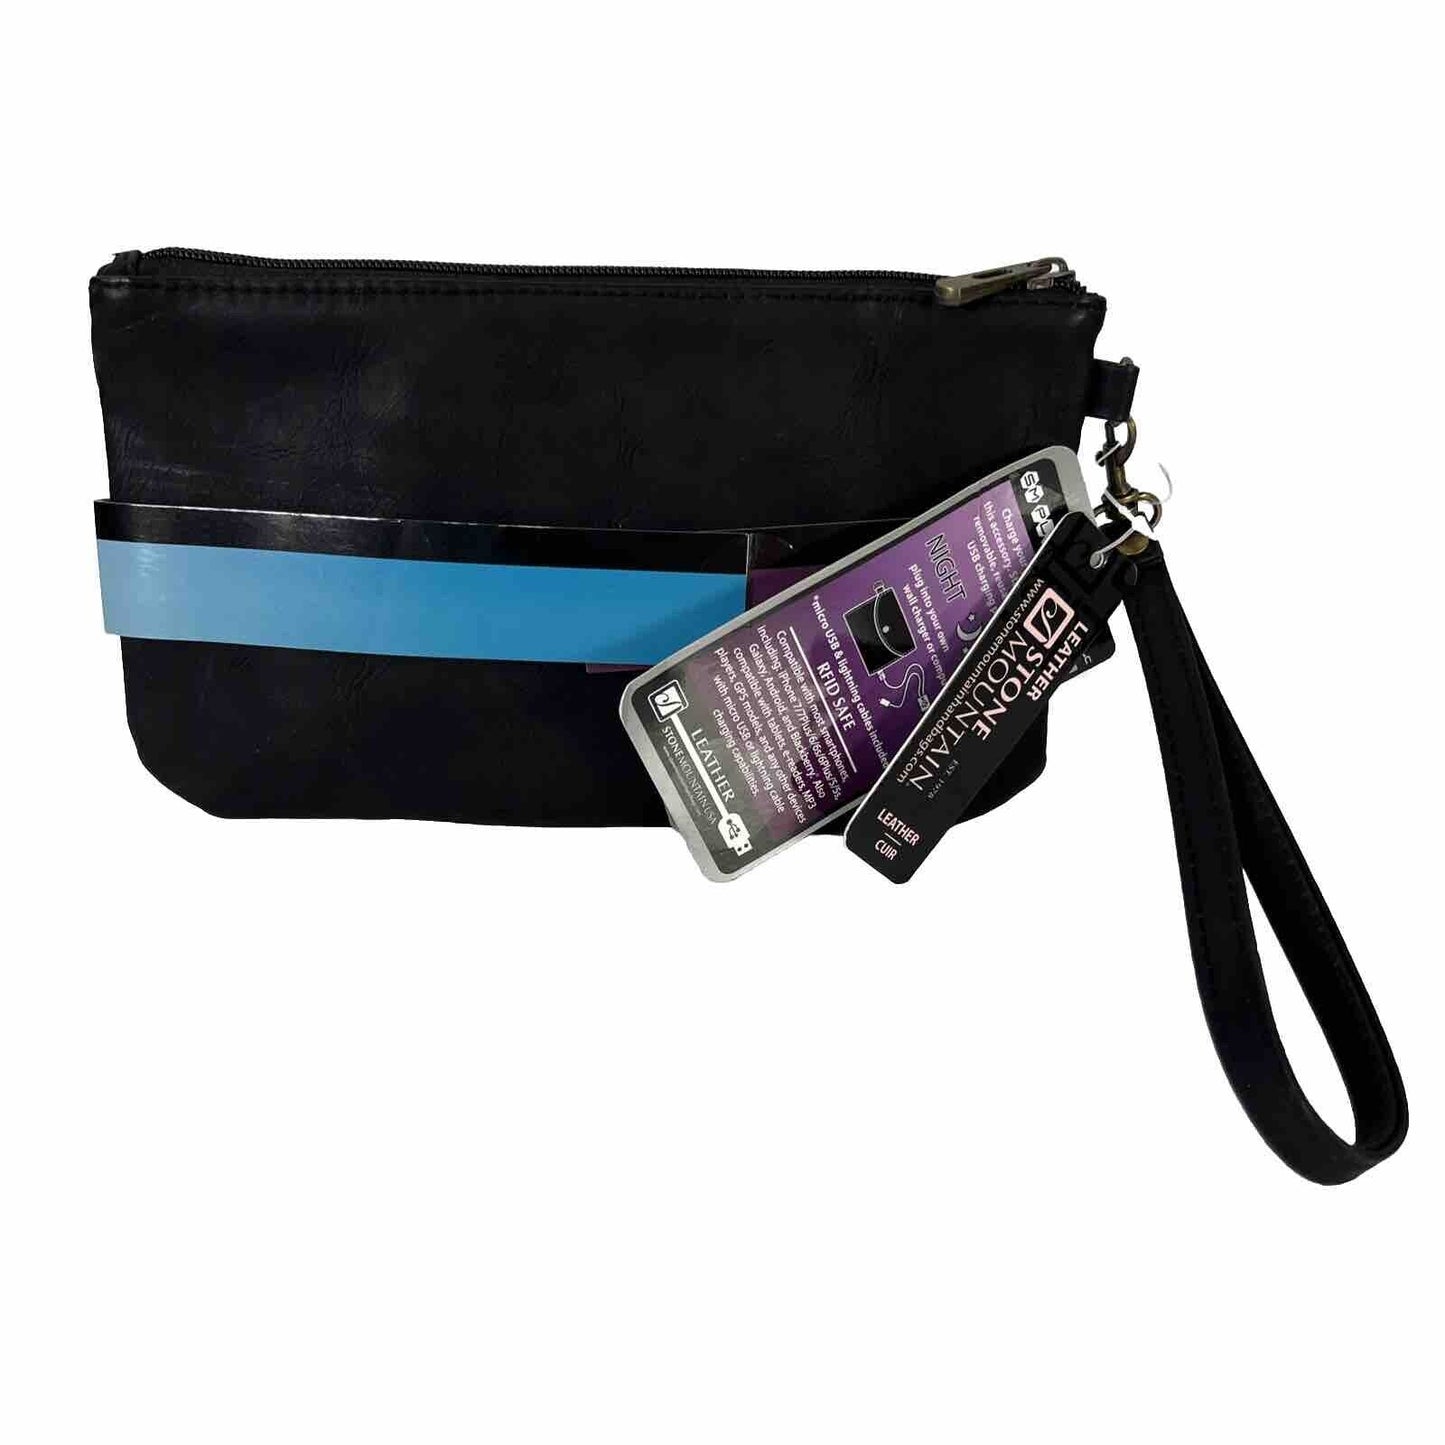 NEW Stone Mountain Black Leather Wristlet Wallet with Power Bank